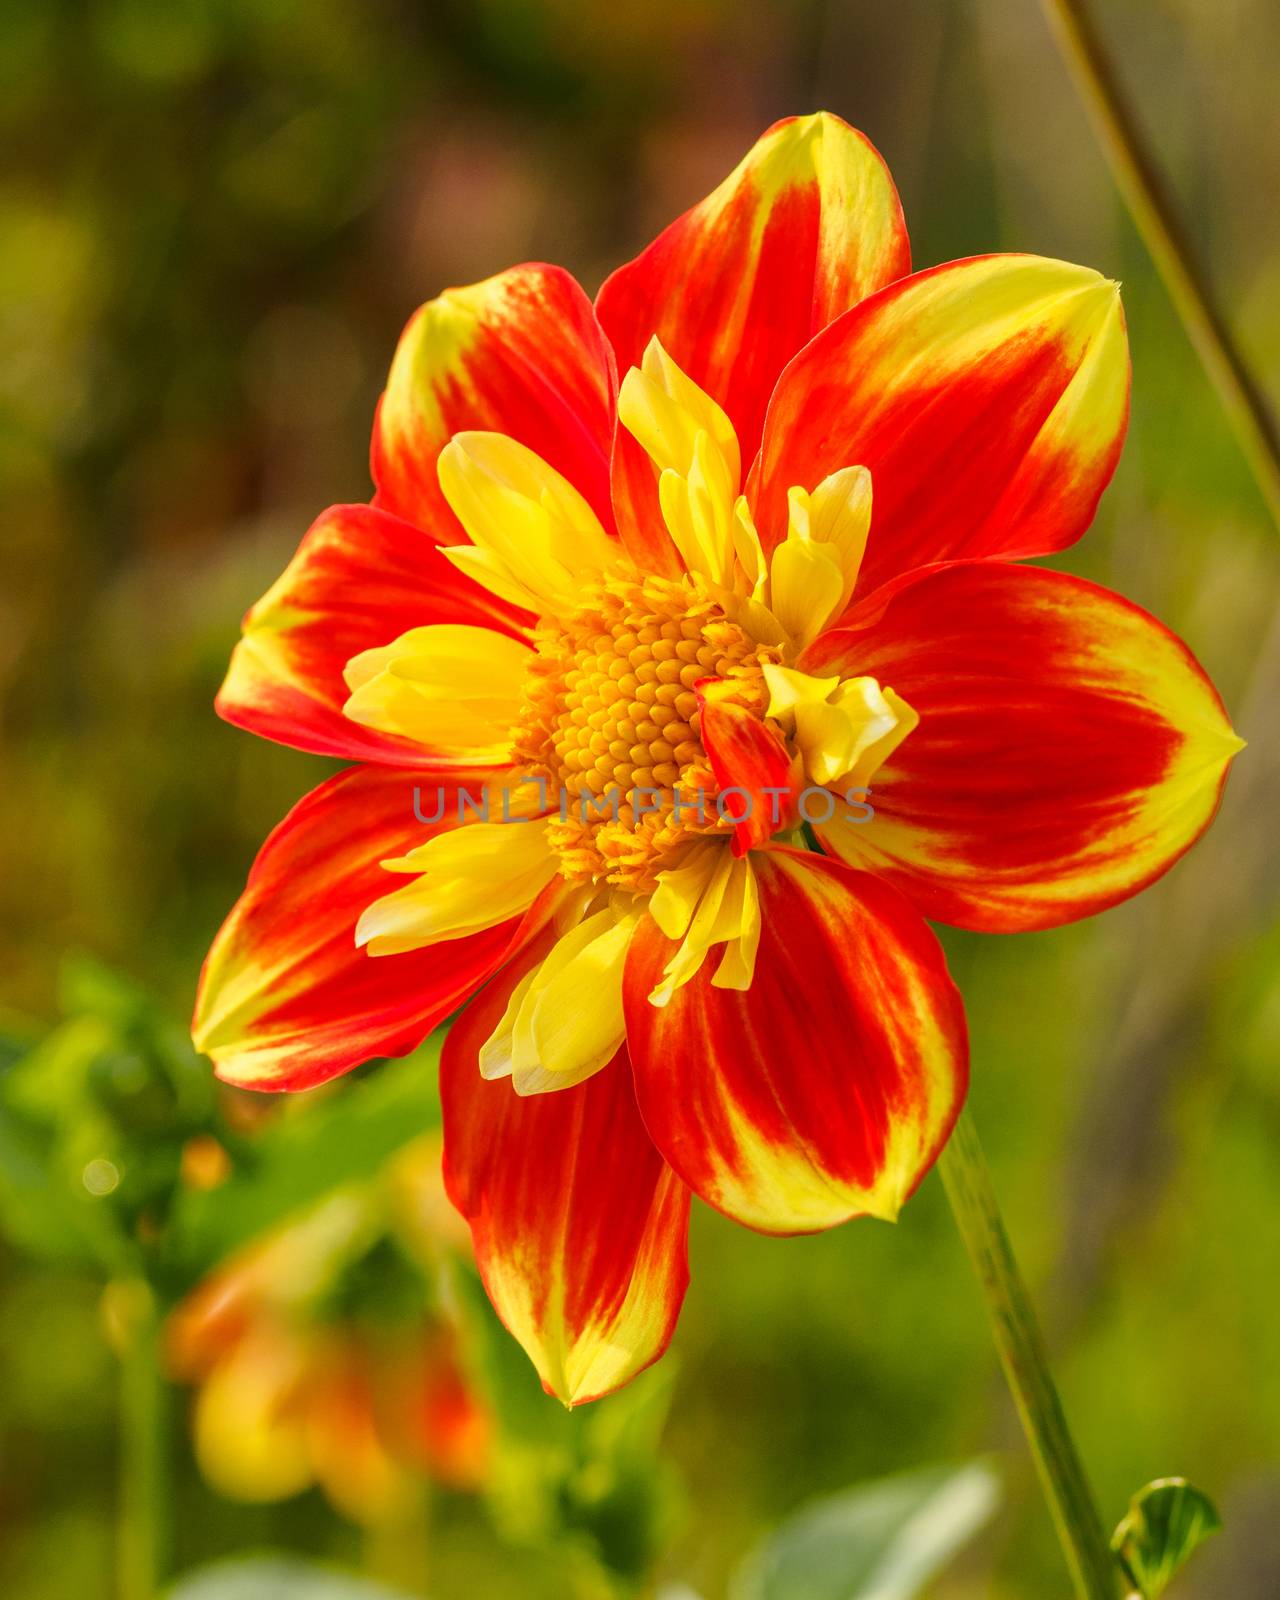 yellow and red dahlia by frankhoekzema